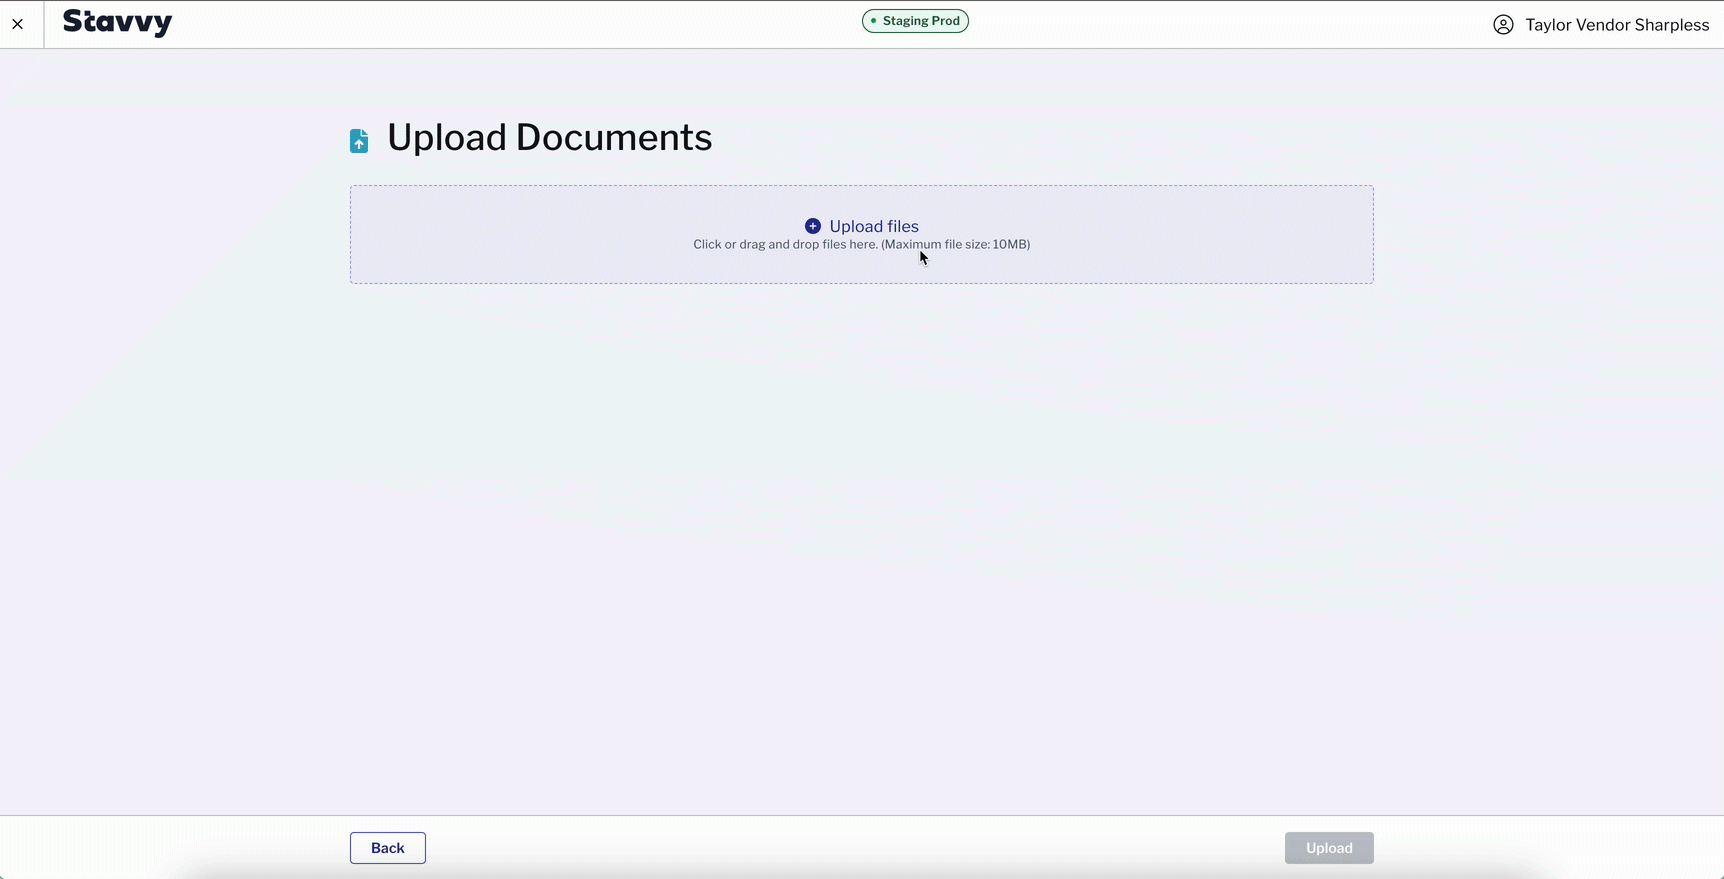 Gif demonstrating uploading a document to the order